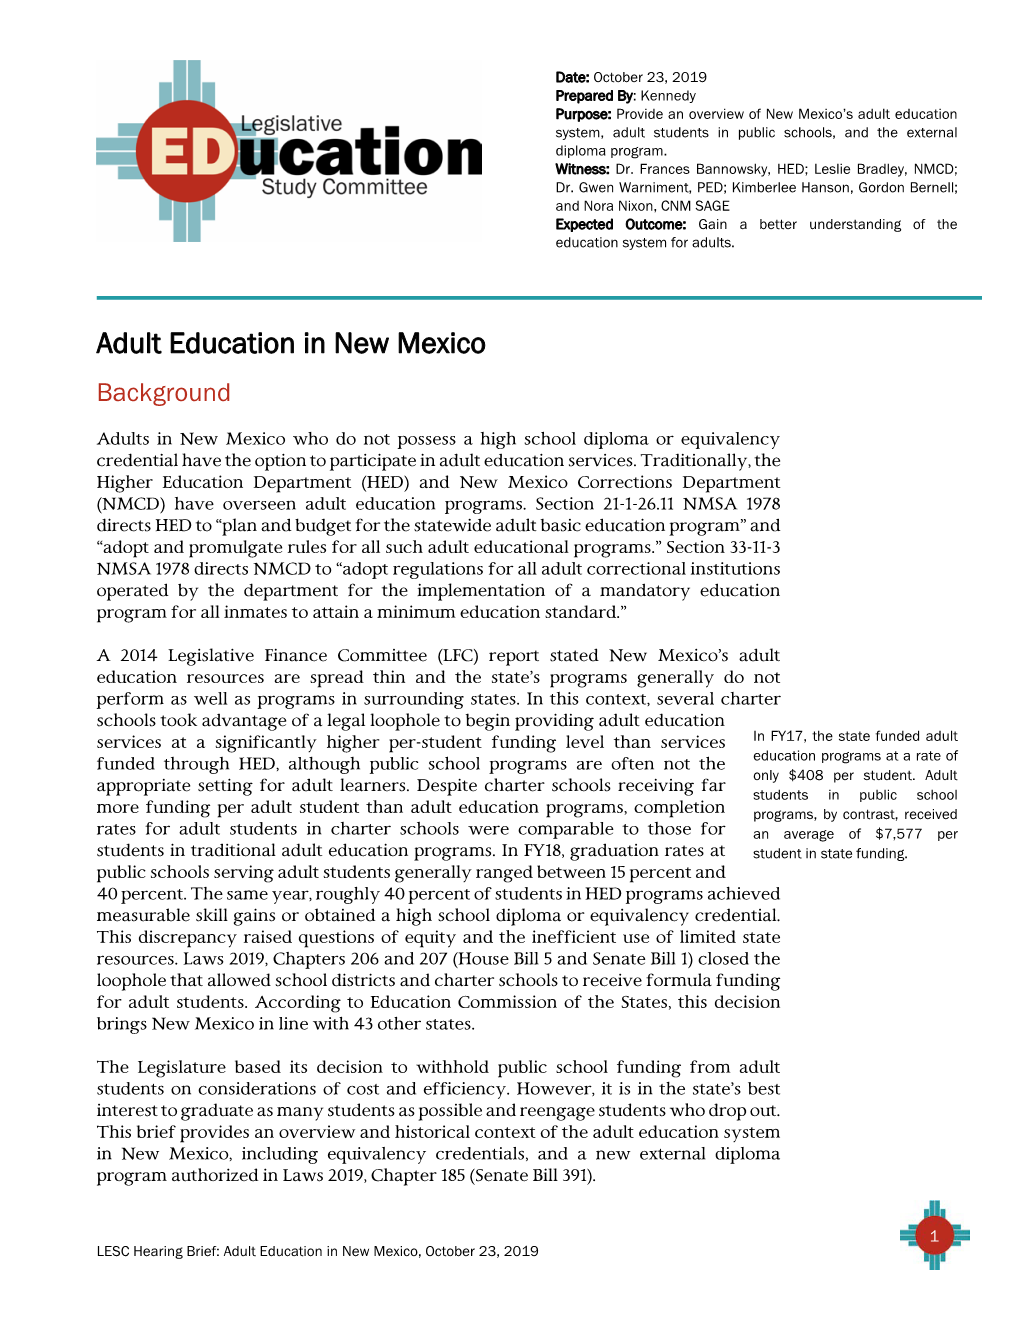 Adult Education in New Mexico Background